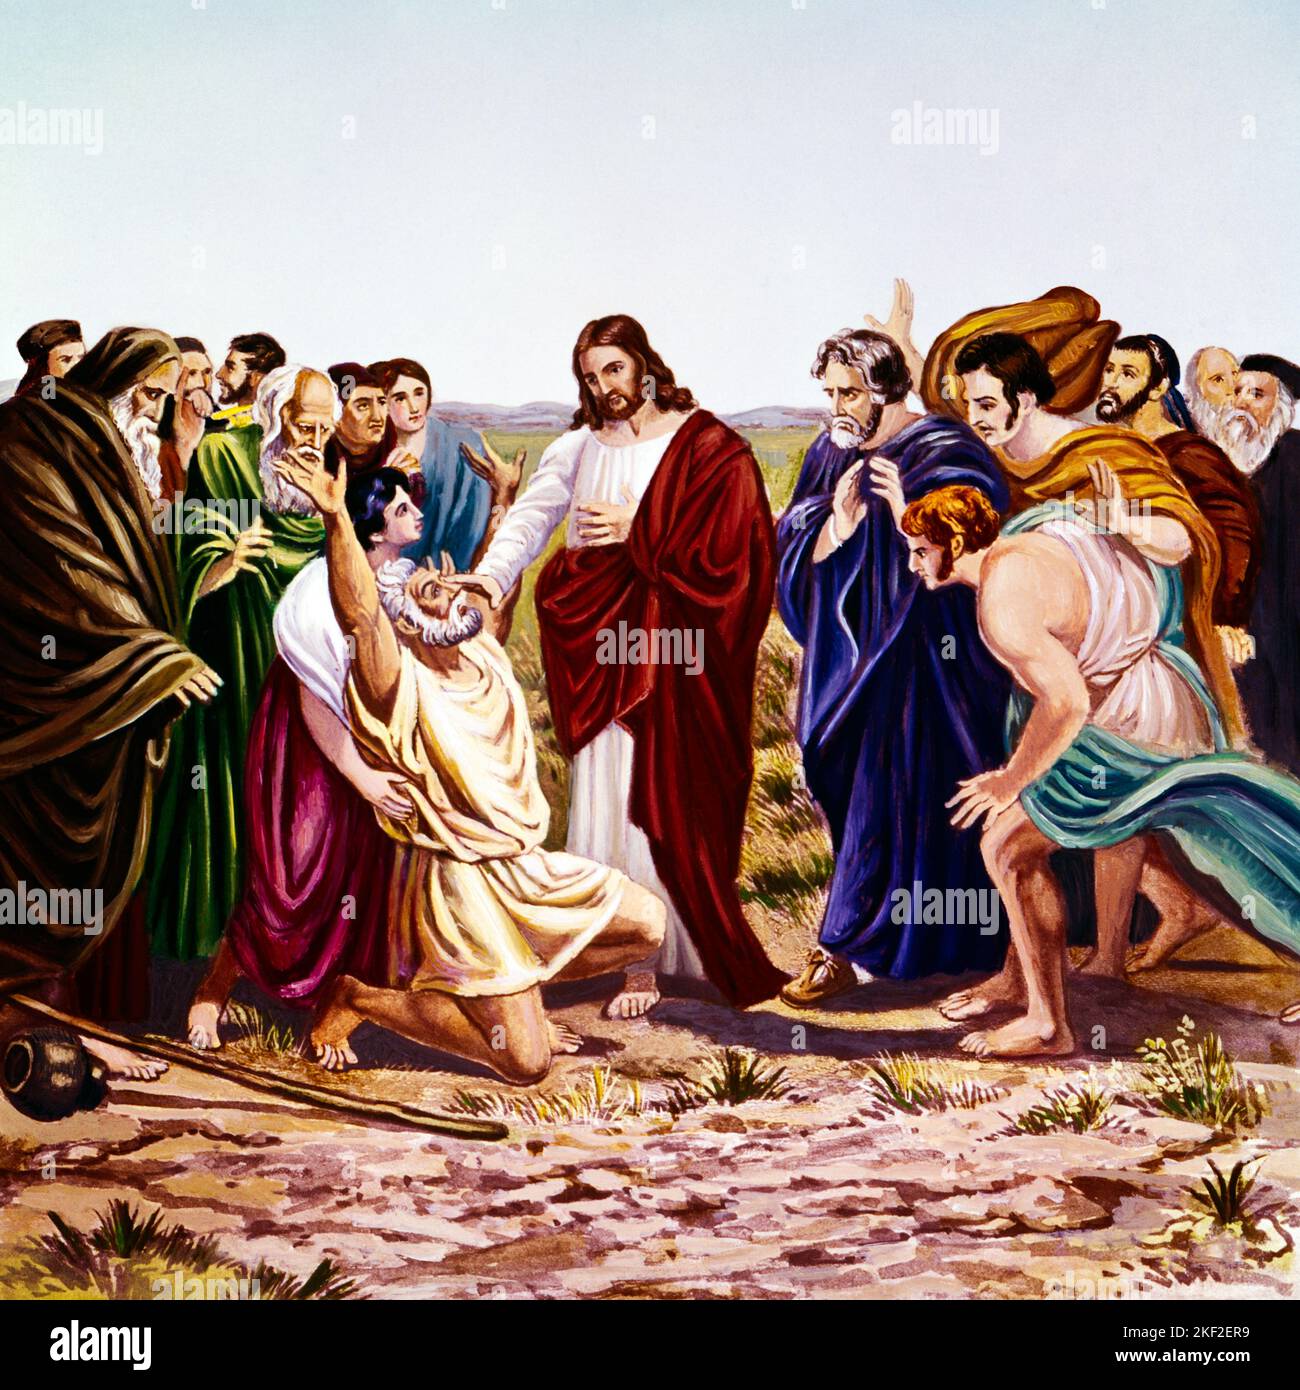 1960s ART OF A MIRACLE JESUS HEALING THE BLIND MAN OF BETHSAIDA 33AD ILLUSTRATION BY THOLEY AFTER RICHTER - kr9411 SPL001 HARS MIRACLE SON OF GOD MIRACLES ARTWORK FAITH MESSIAH SPIRITUAL TALENT BELIEF INSPIRATIONAL JESUS CHRIST OLD FASHIONED Stock Photo